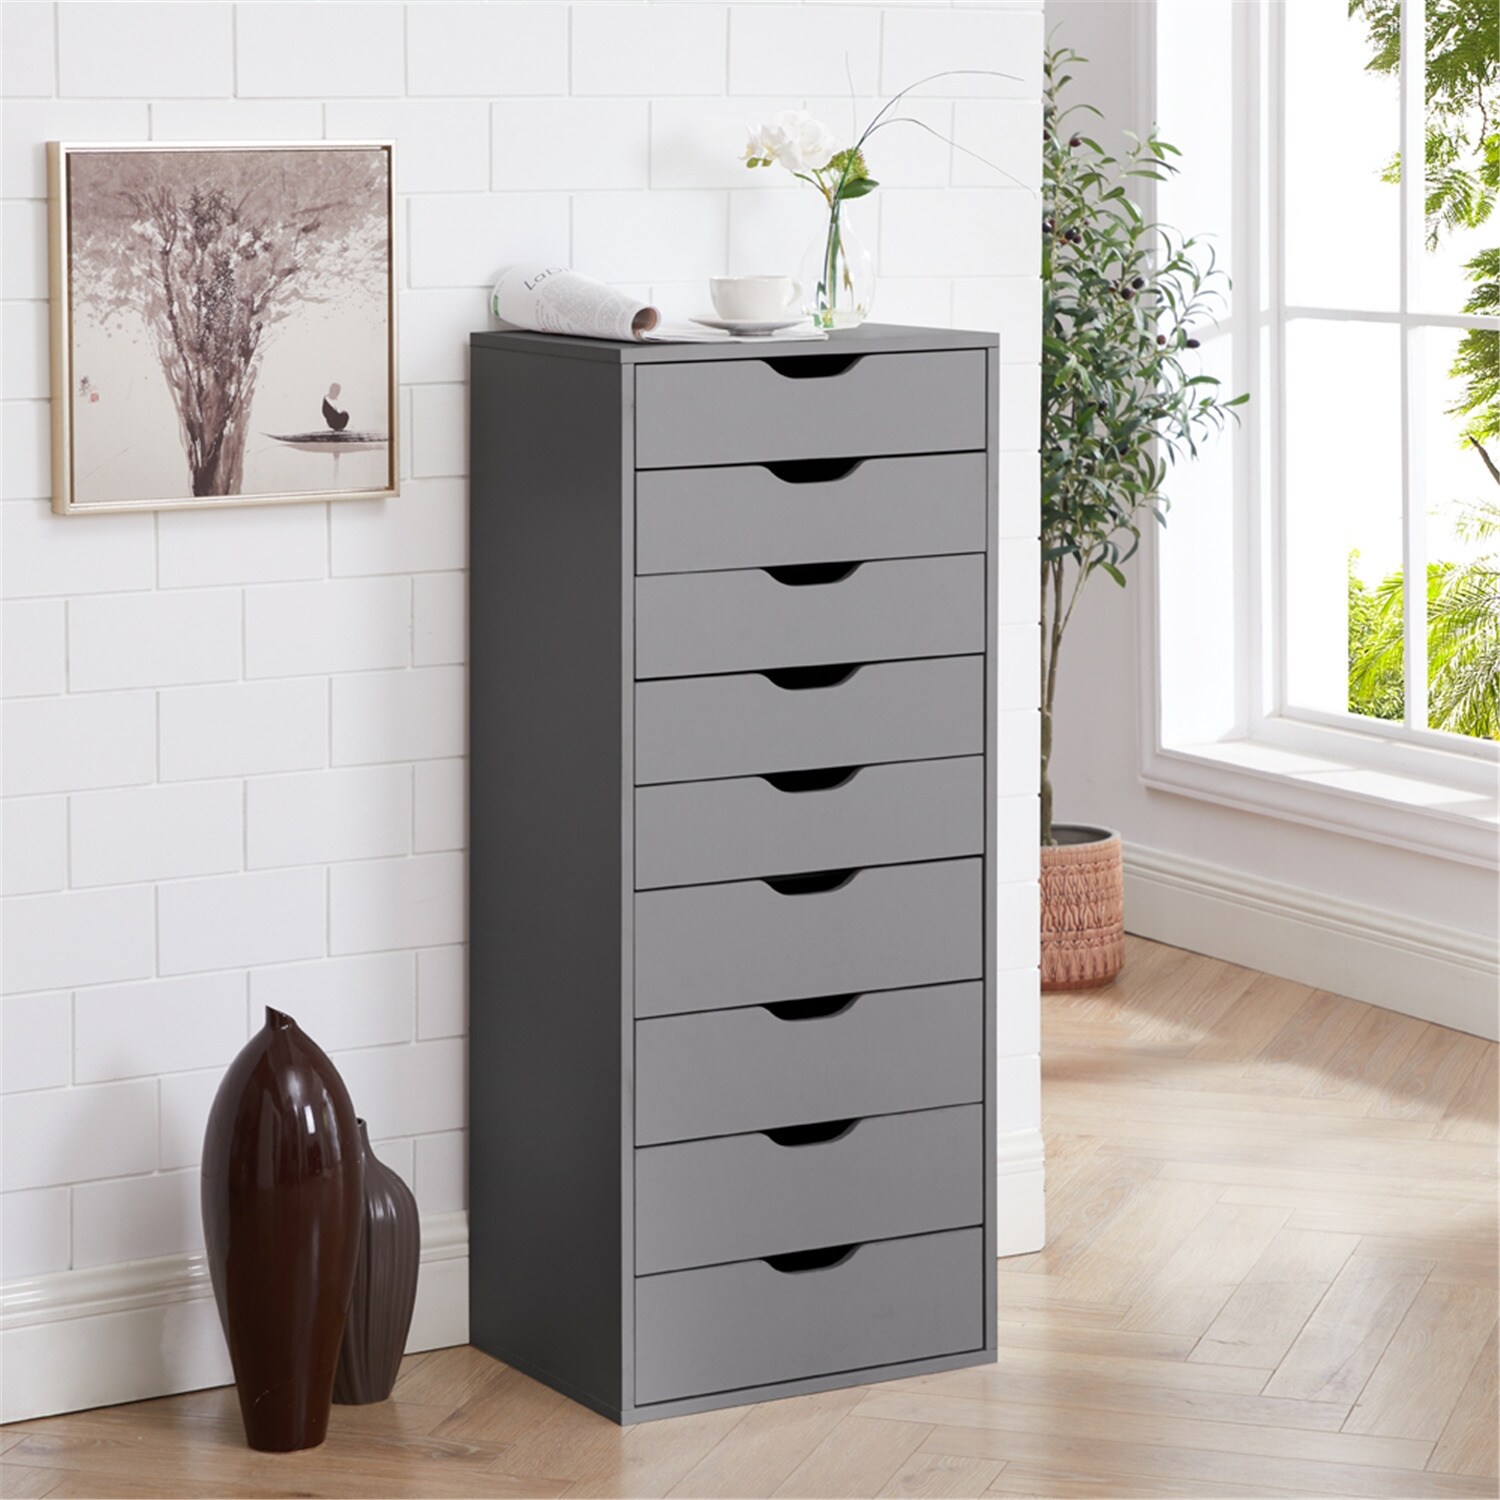 Office File Cabinets Wooden File Cabinets Lateral File Cabinet Wood File Cabinet Mobile File Cabinet Mobile Storage Cabinet Grey - image 1 of 5